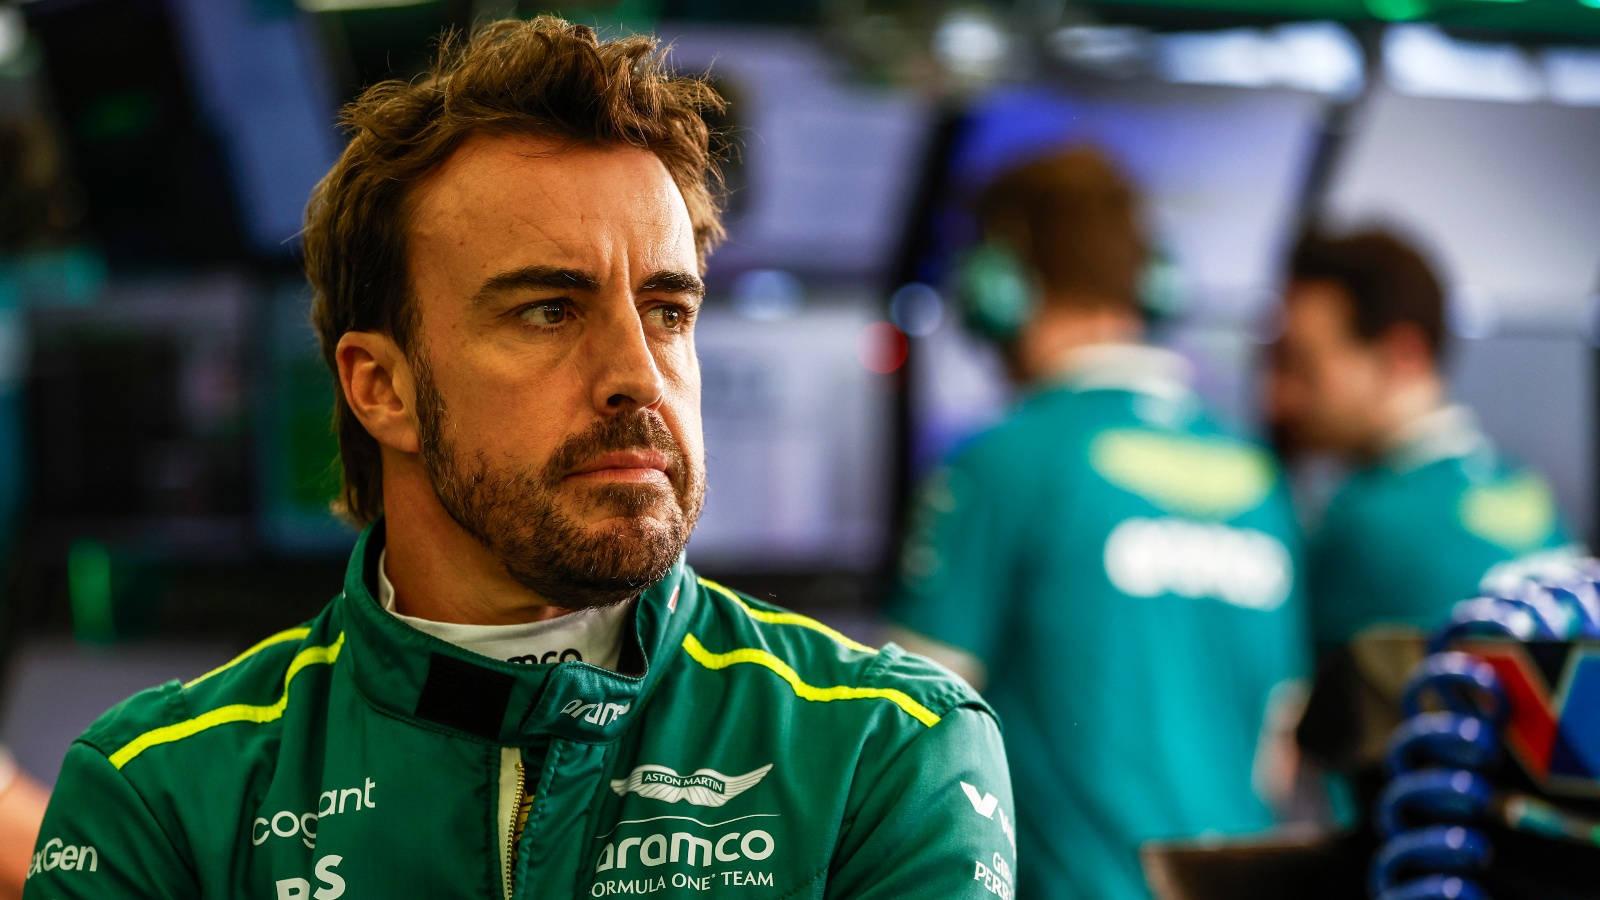 Breaking news: Fernando Alonso announced his retirement from Aston mantis following the loss of his beloved…